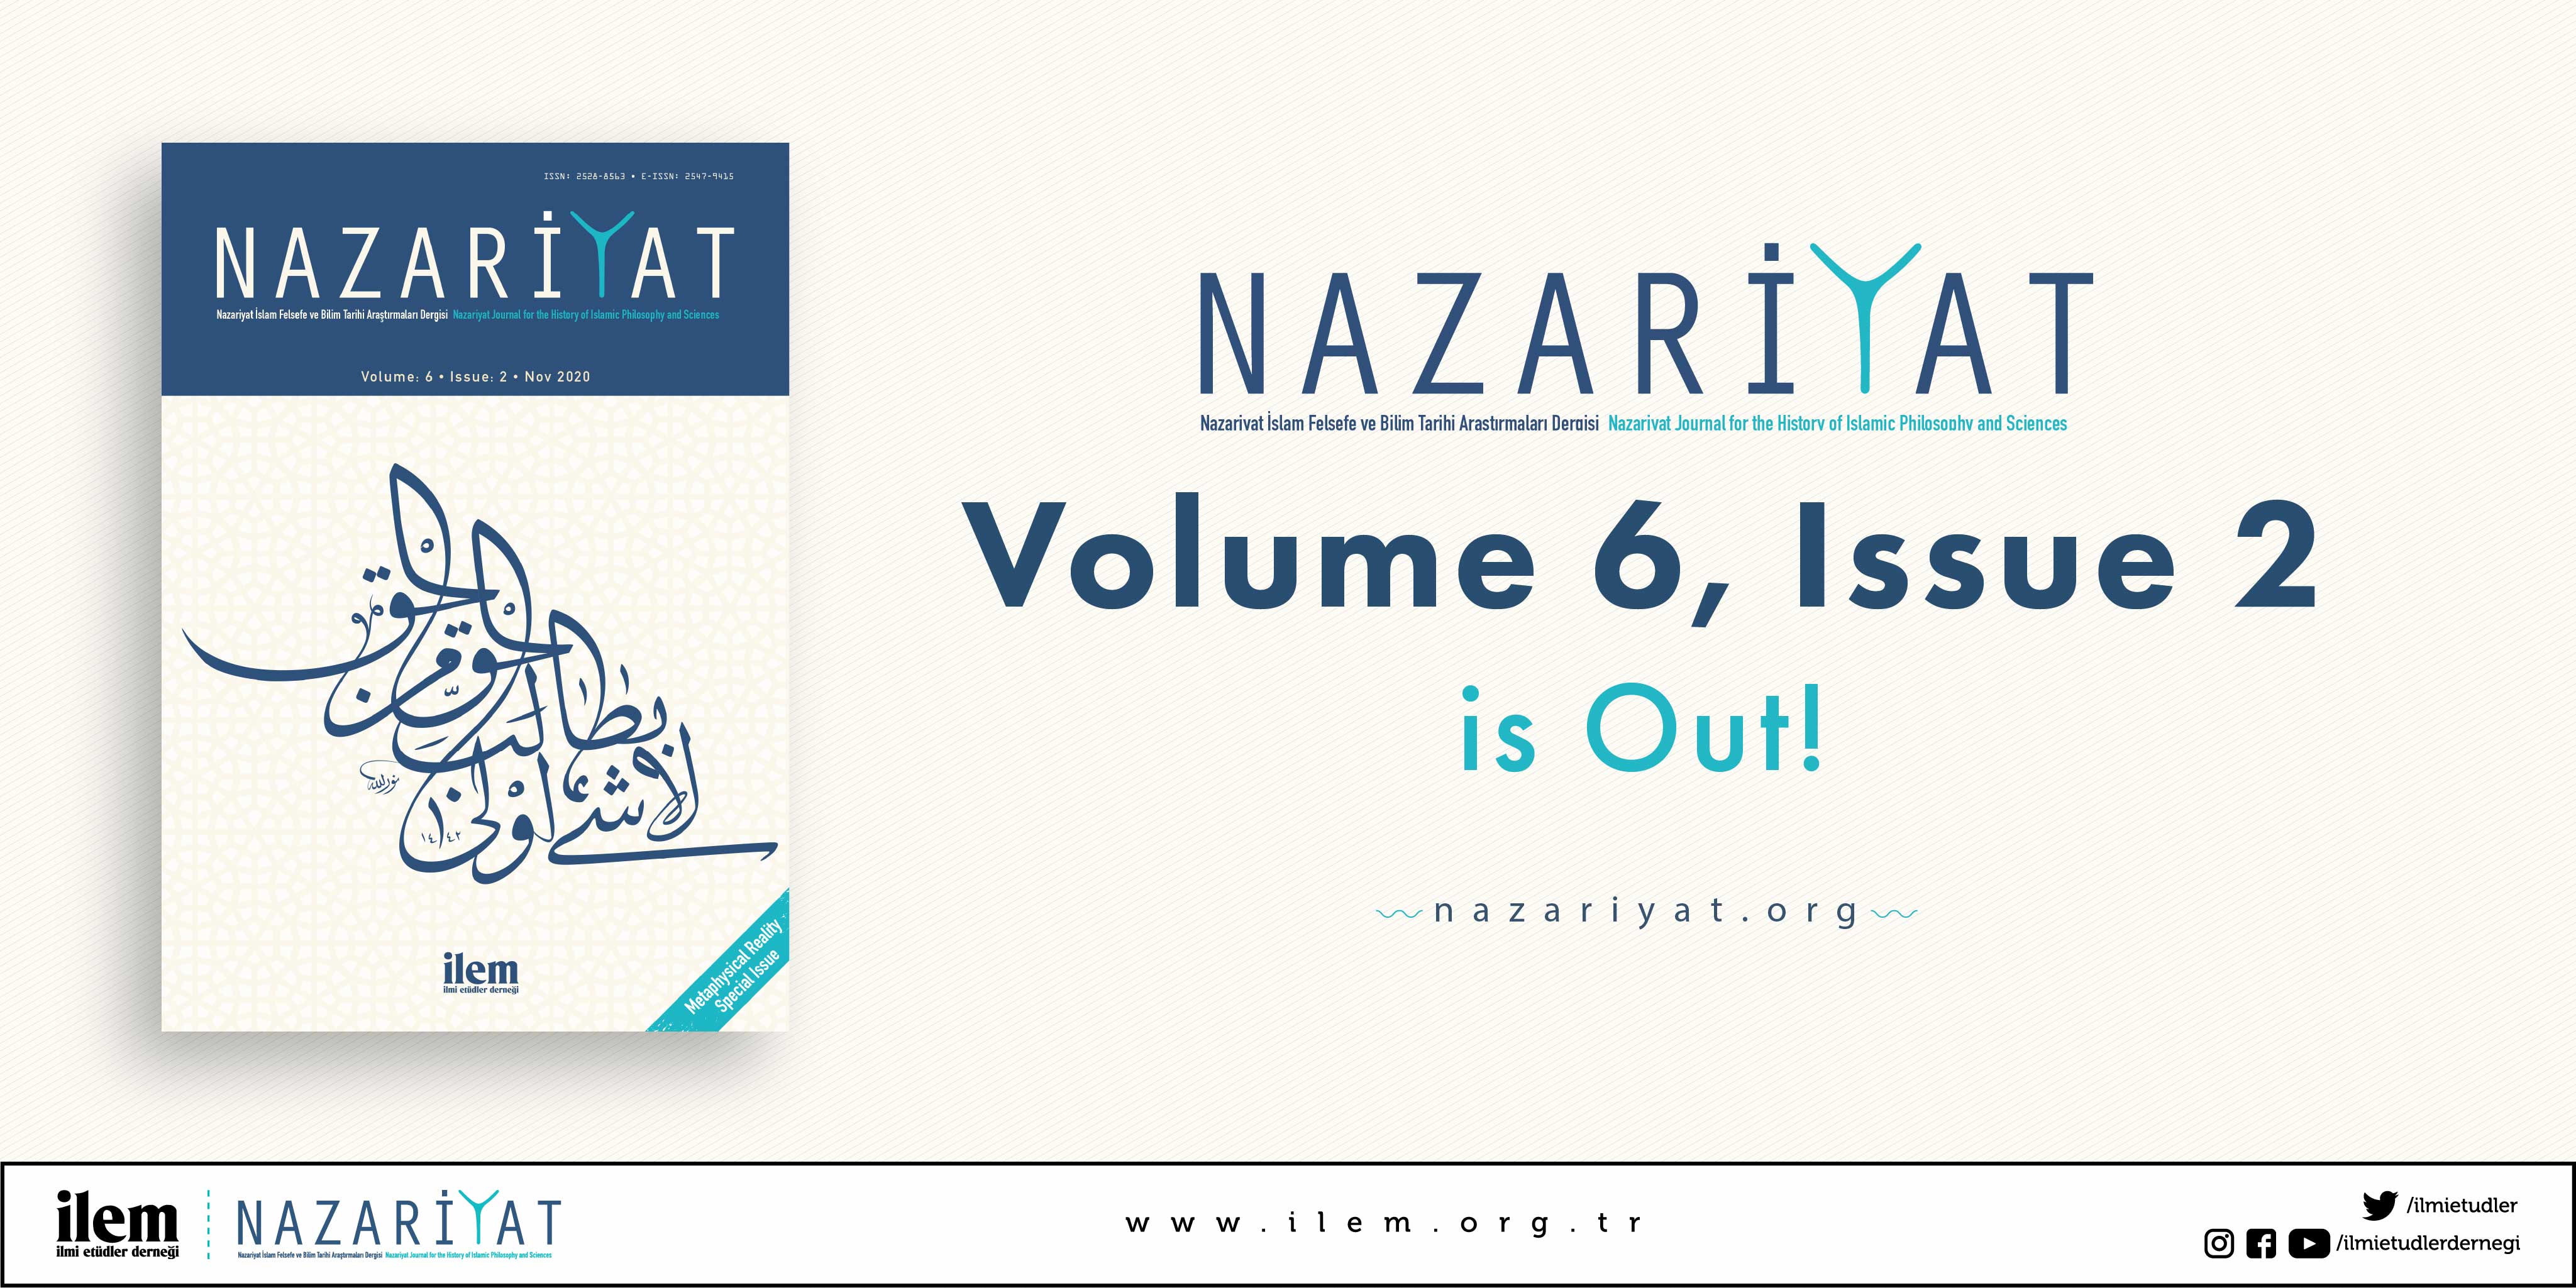 The Volume 6 Issue 2 of Nazariyat Journal is Out!